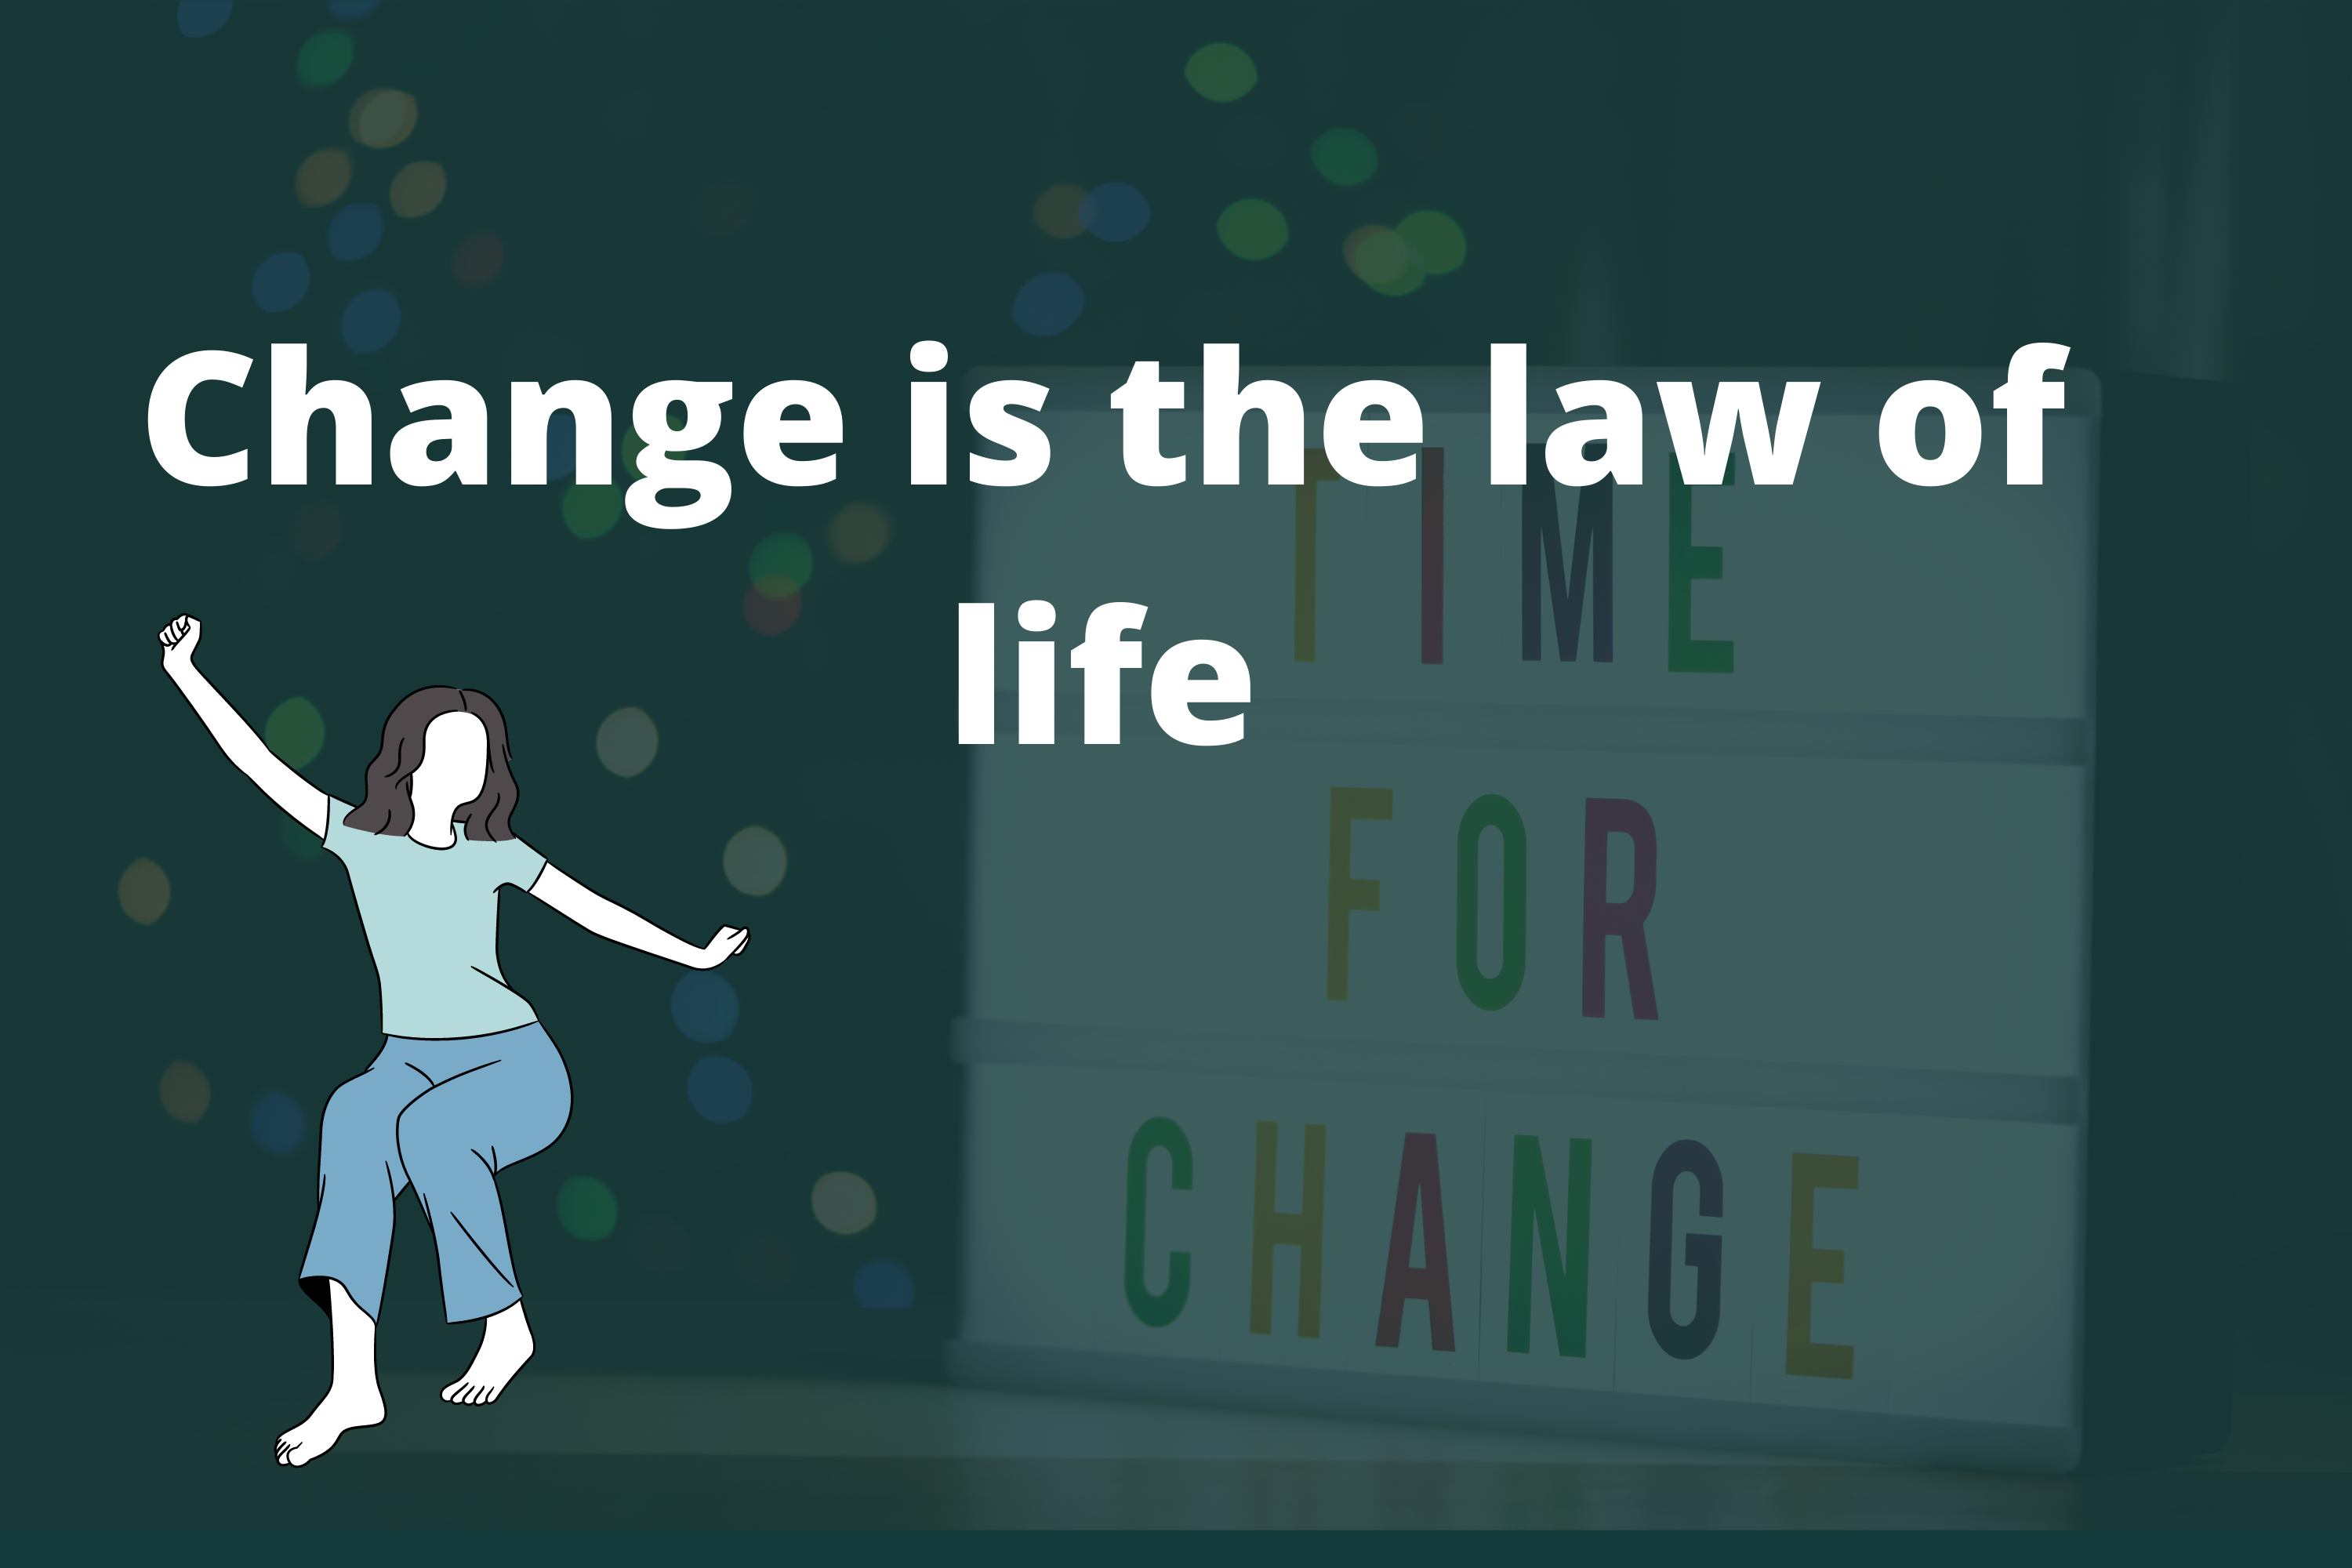 Change is law of life